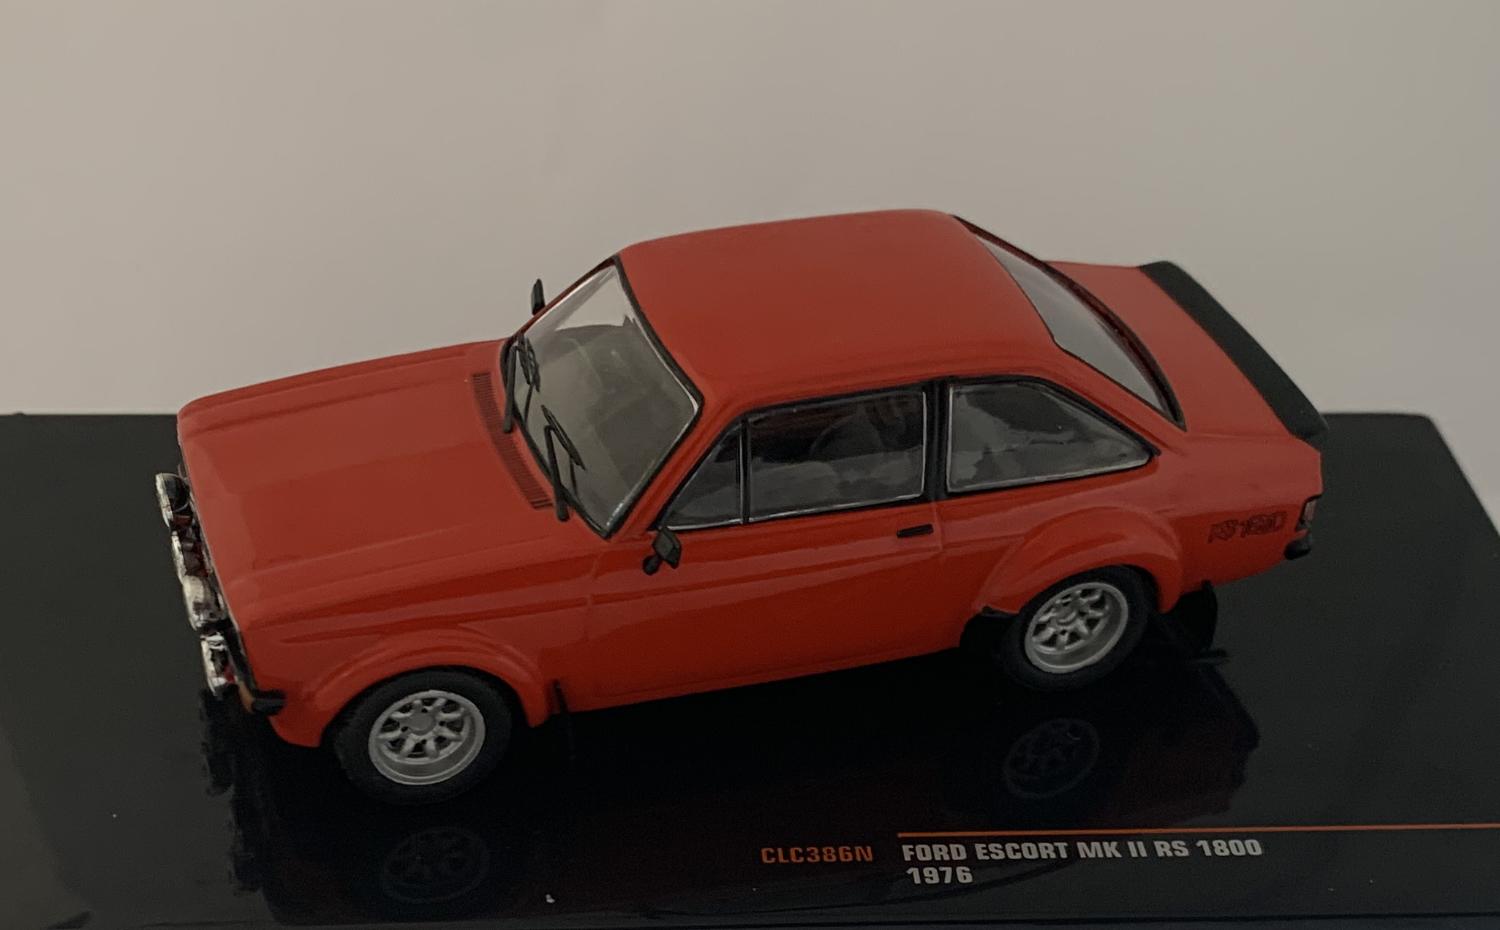 Ford Escort mk2 RS 1800 1975 in red, 1:43 scale model from IXO, CLC386N